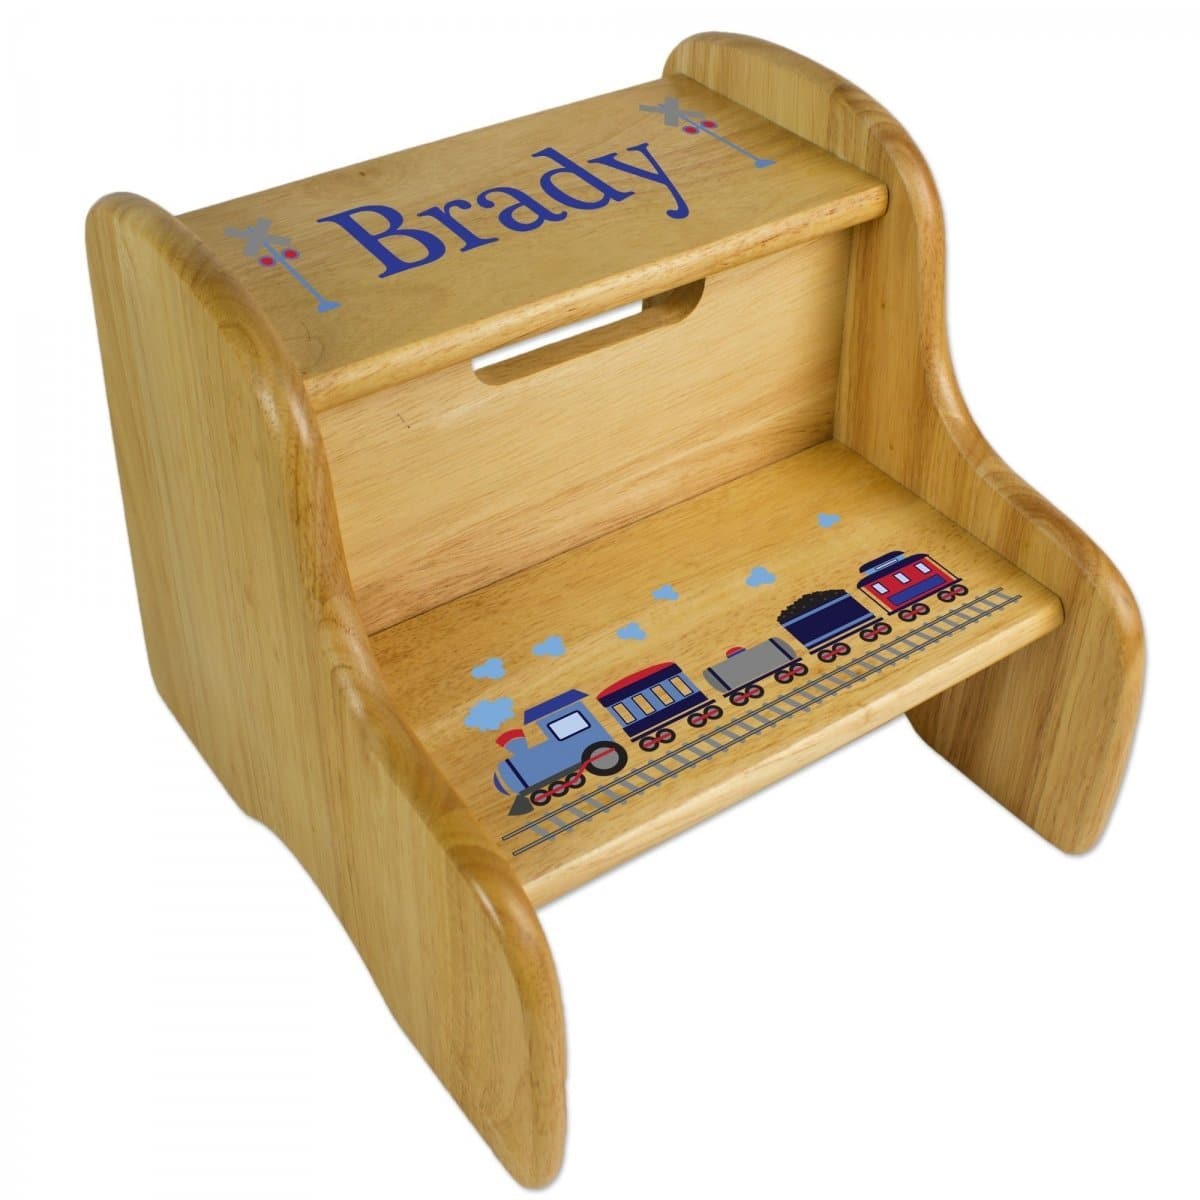 Personalized Big Stepper Stool-Many Designs Available